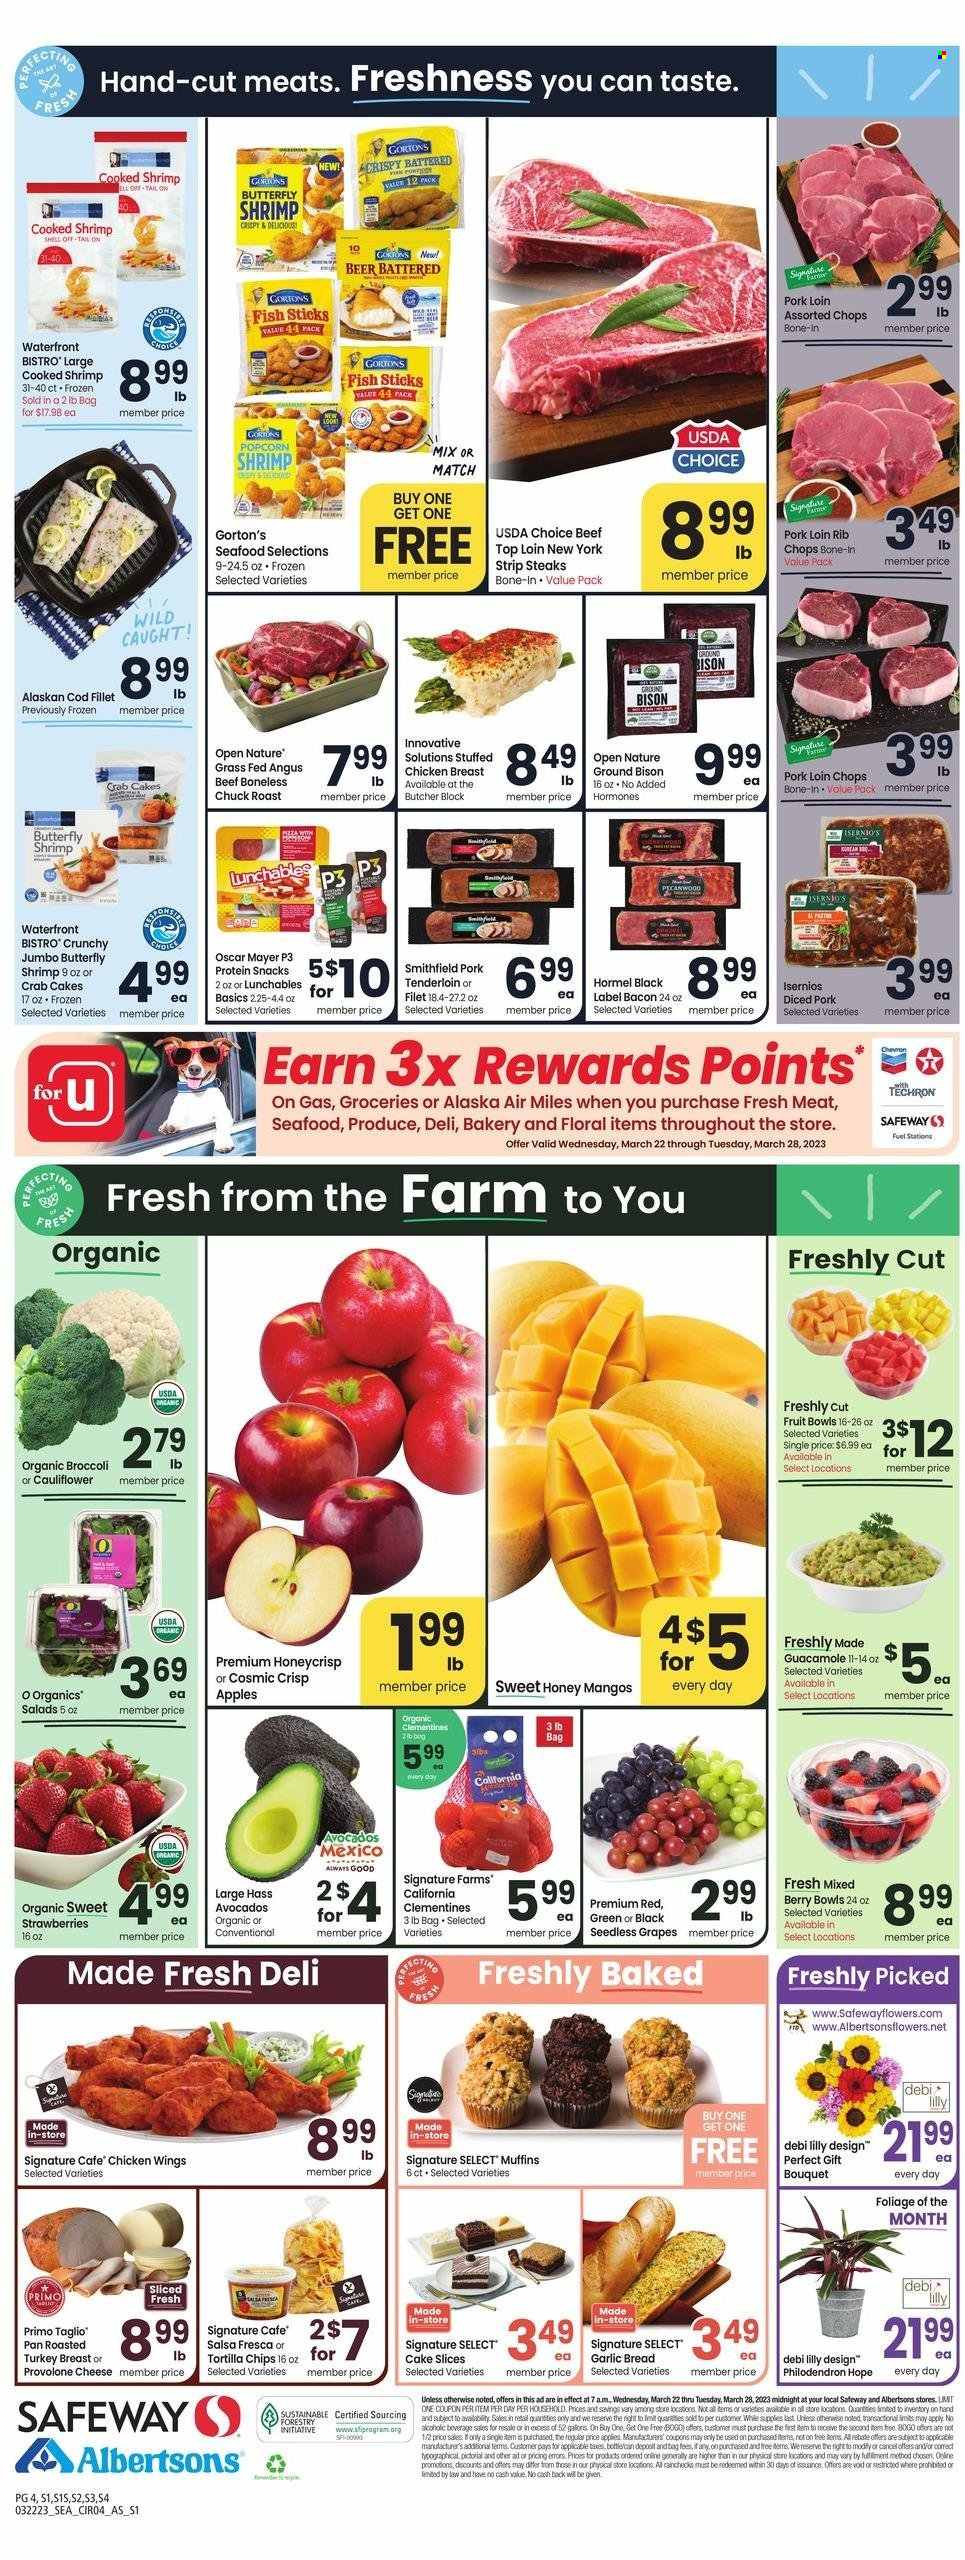 thumbnail - Safeway Flyer - 03/22/2023 - 03/28/2023 - Sales products - bread, muffin, broccoli, apples, grapes, mango, seedless grapes, strawberries, chicken wings, chicken, beef meat, steak, chuck roast, striploin steak, bison meat, roast, pork chops, pork loin, pork meat, pork tenderloin, rib chops, cod, alaskan cod fillet, seafood, fish, shrimps, fish fingers, Gorton's, fish sticks, crab cake, pizza, Lunchables, Hormel, stuffed chicken, bacon, Oscar Mayer, Provolone, snack, tortilla chips, guacamole, salsa, beer, pan, bouquet, clementines. Page 4.